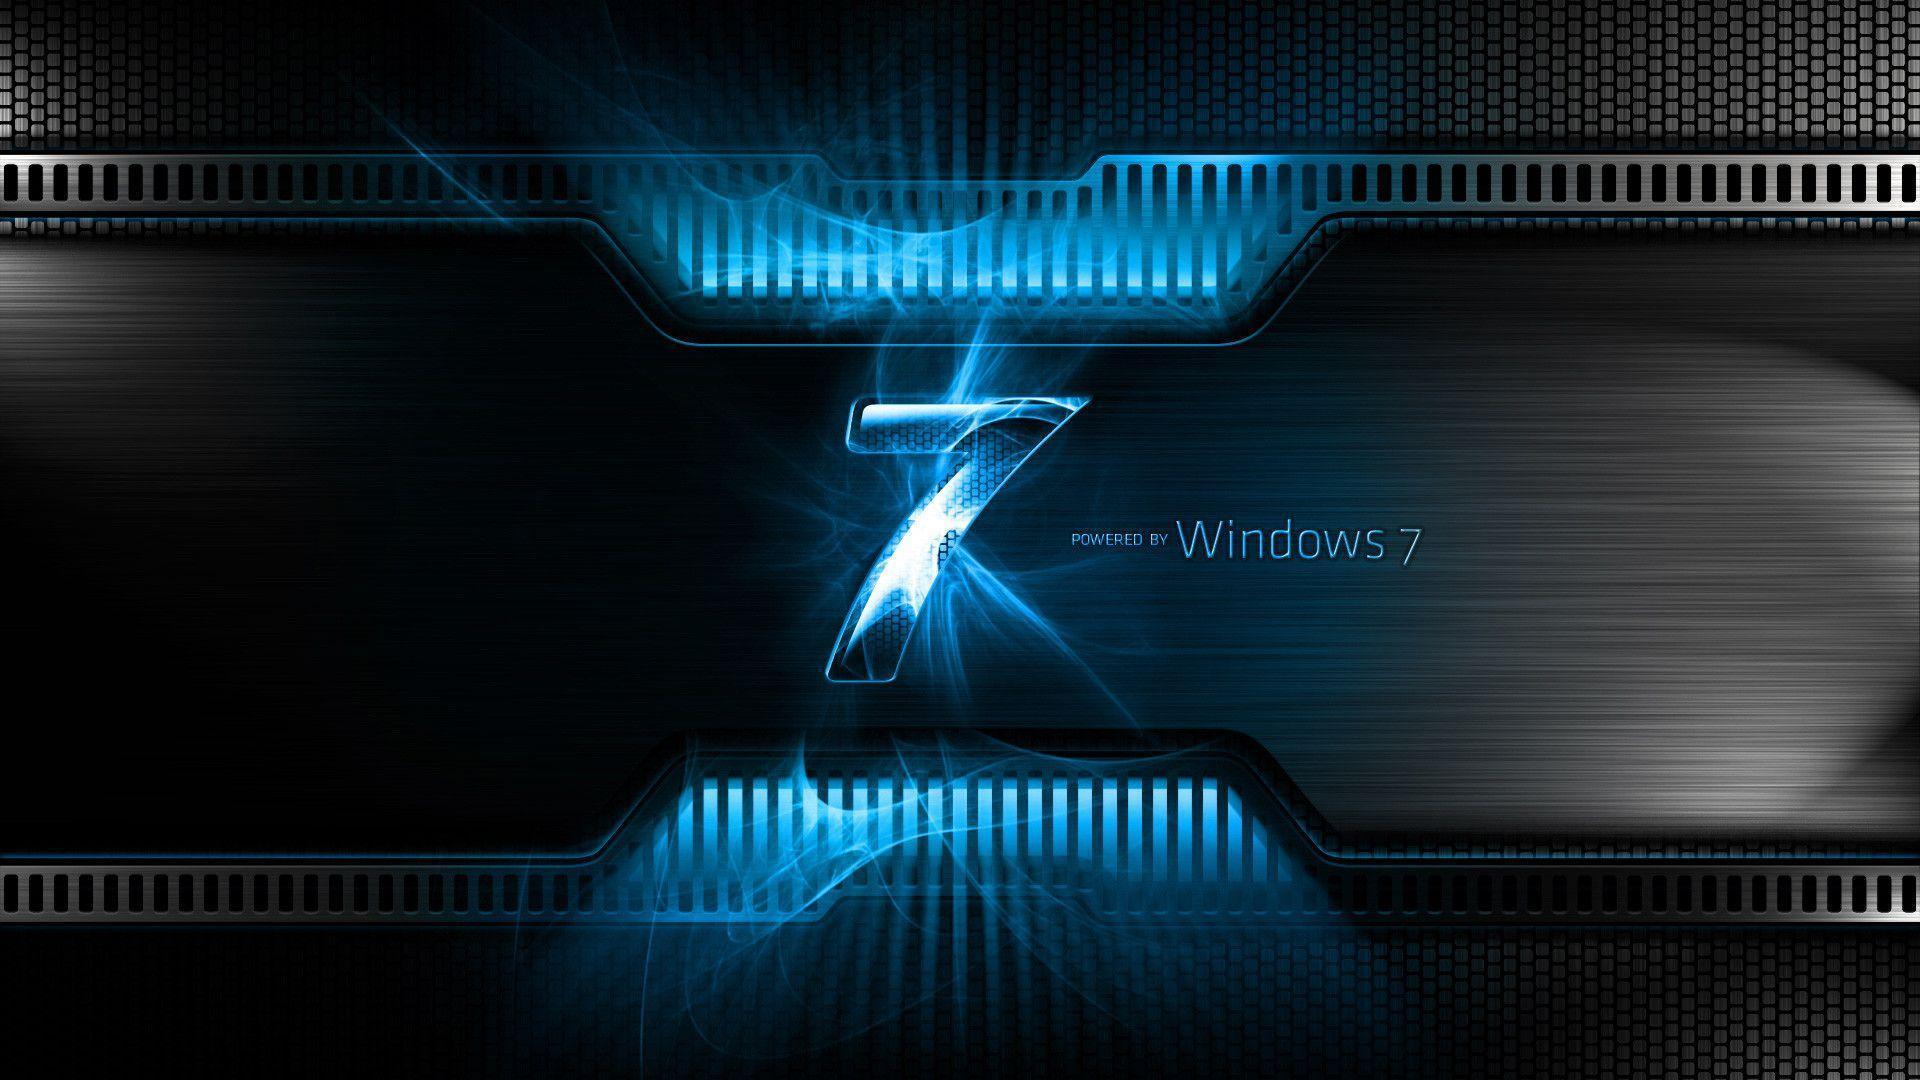 Windows 7 Wallpapers Hd New Free Download Wall Wallpapers